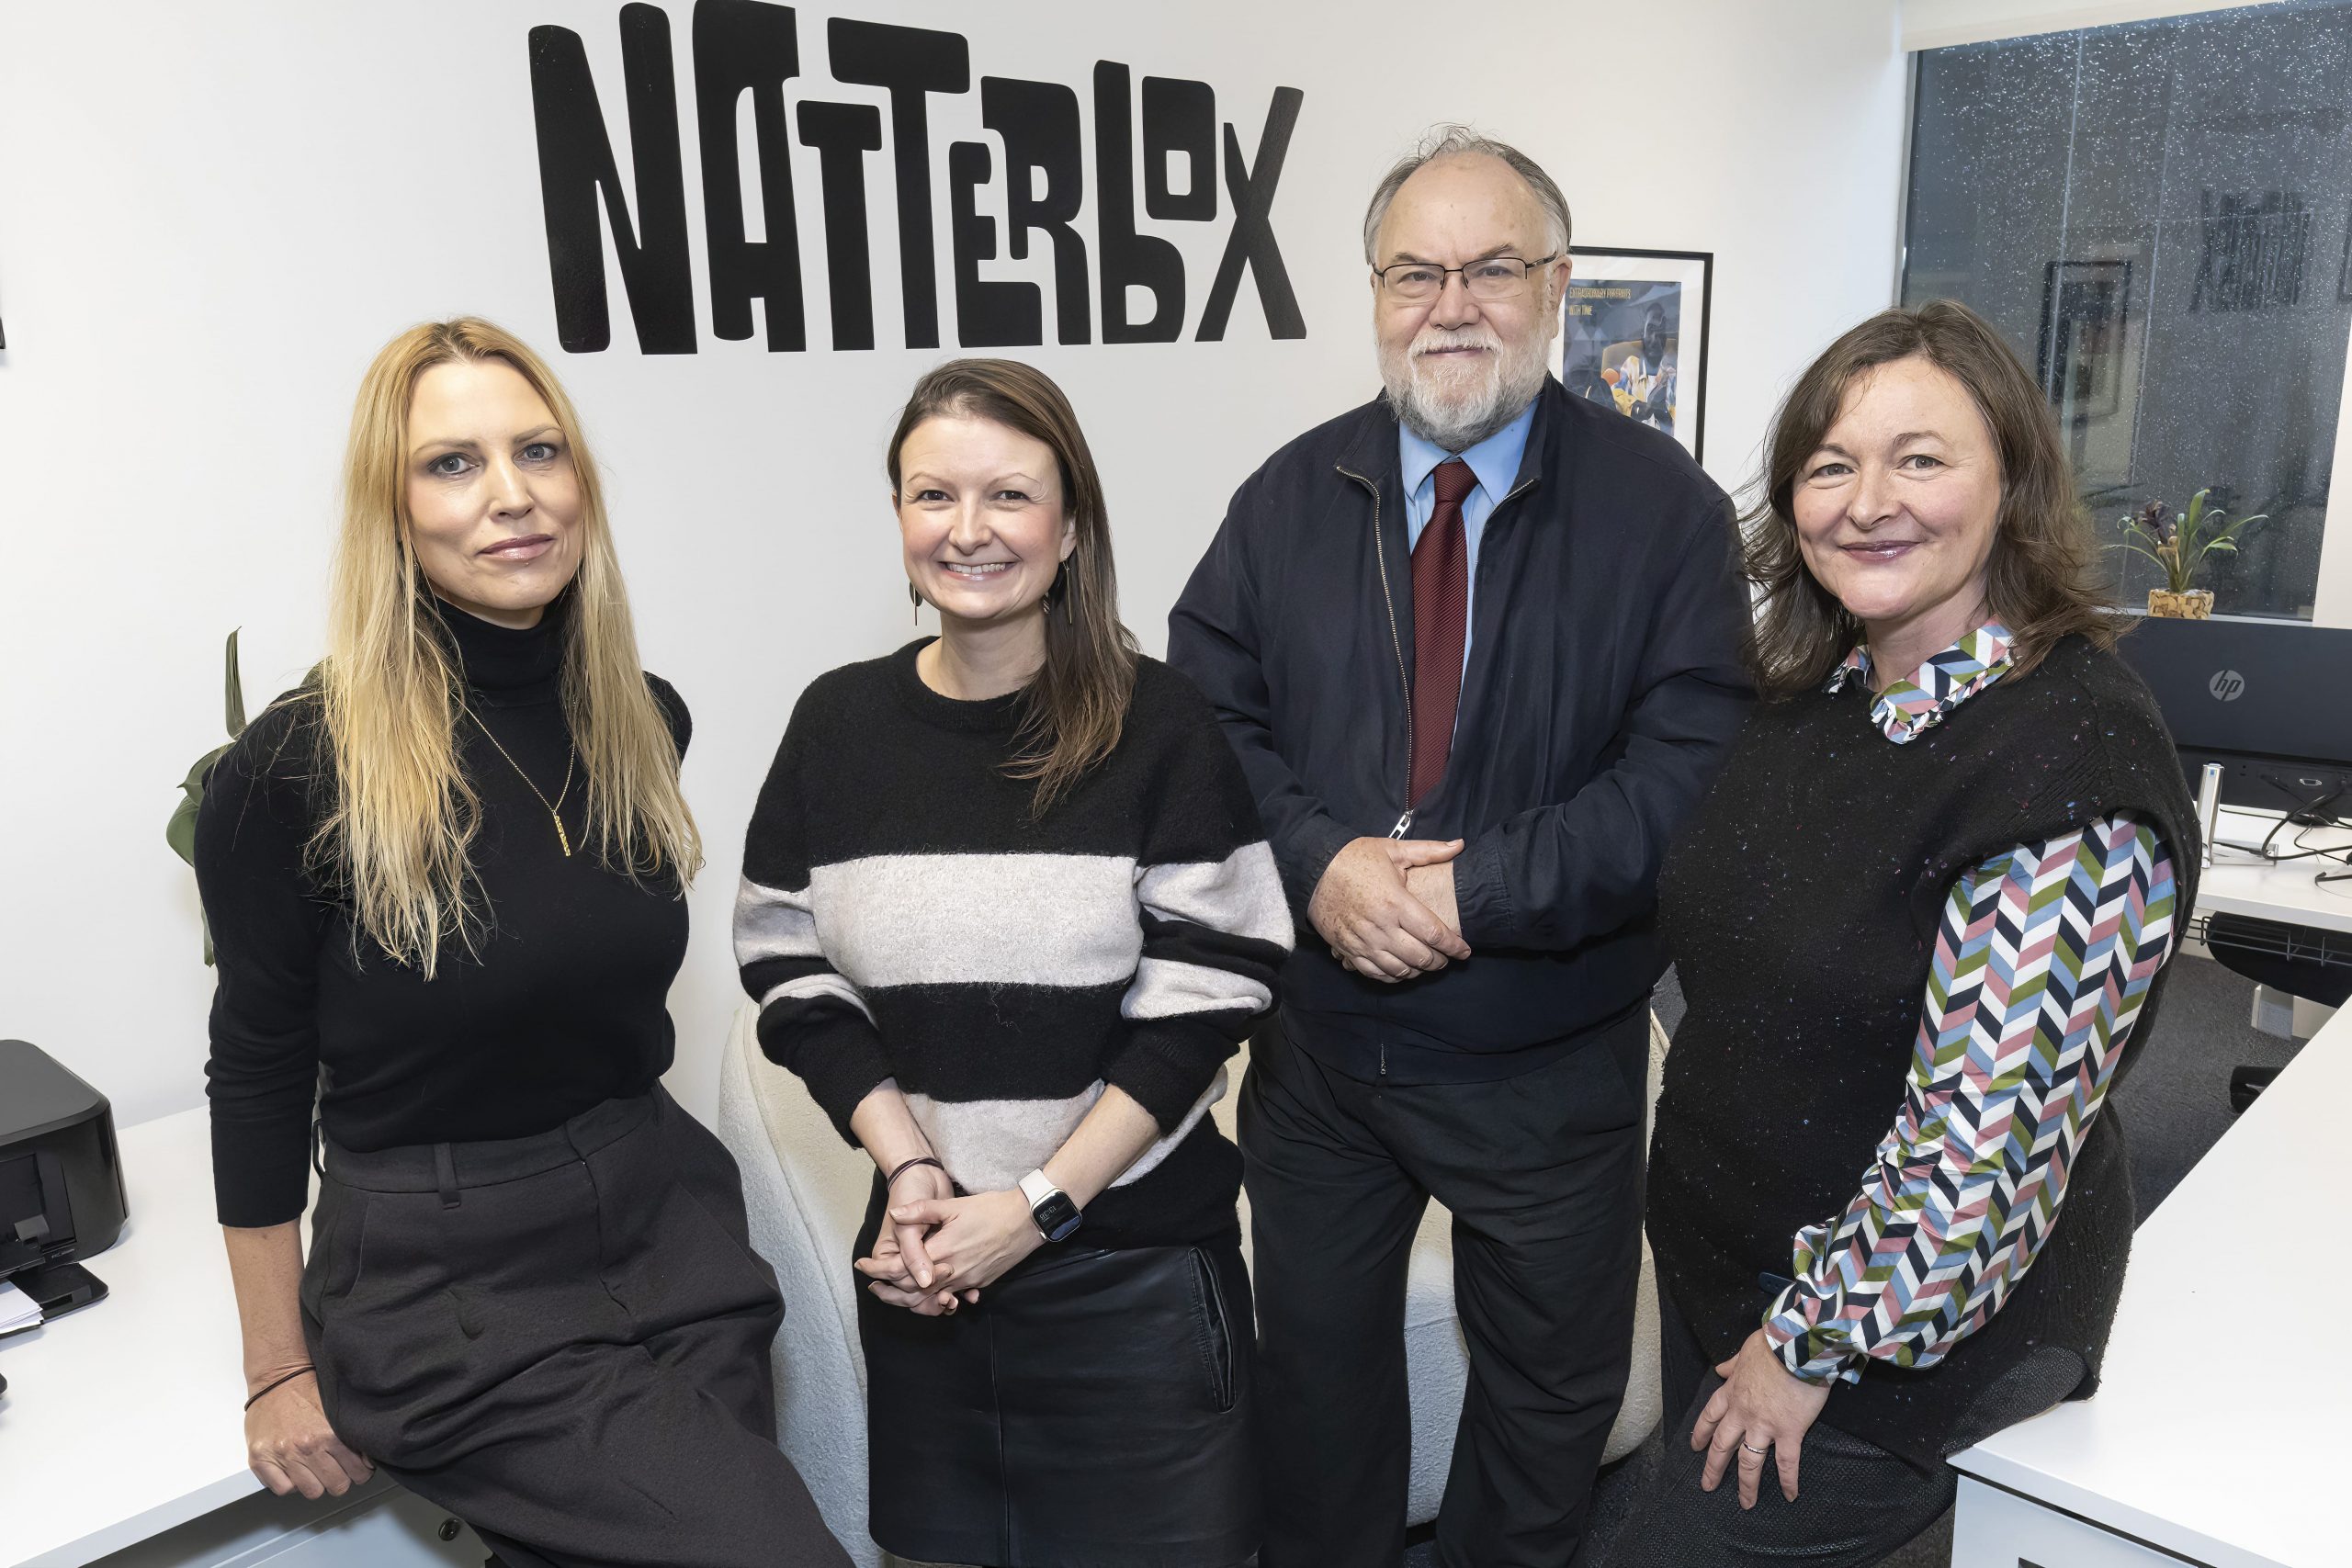 Ali, Jen, Cllr Brain and Lisa all stood in front of Natterbox sign in office smiling towards camera.